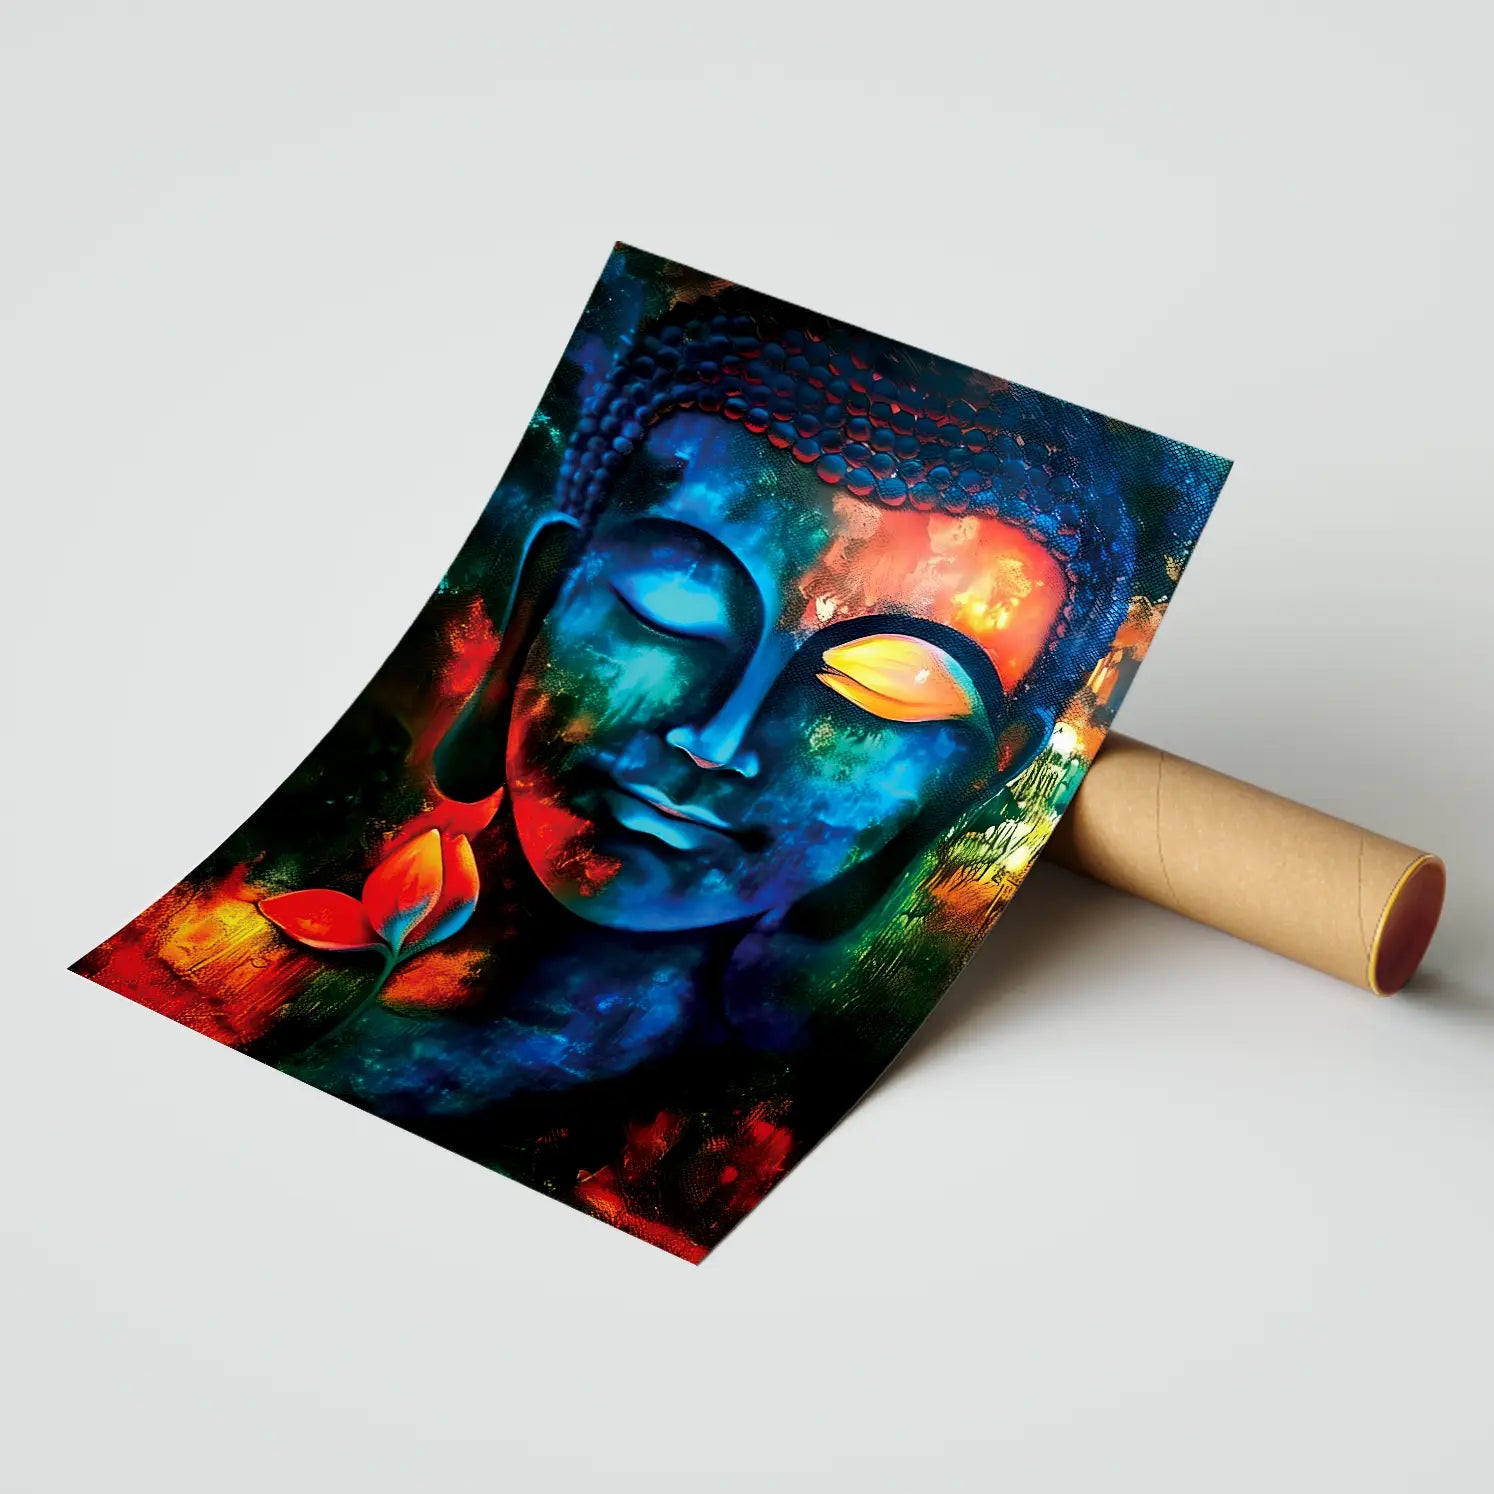 Lord Buddha Poster | Frame | Canvas